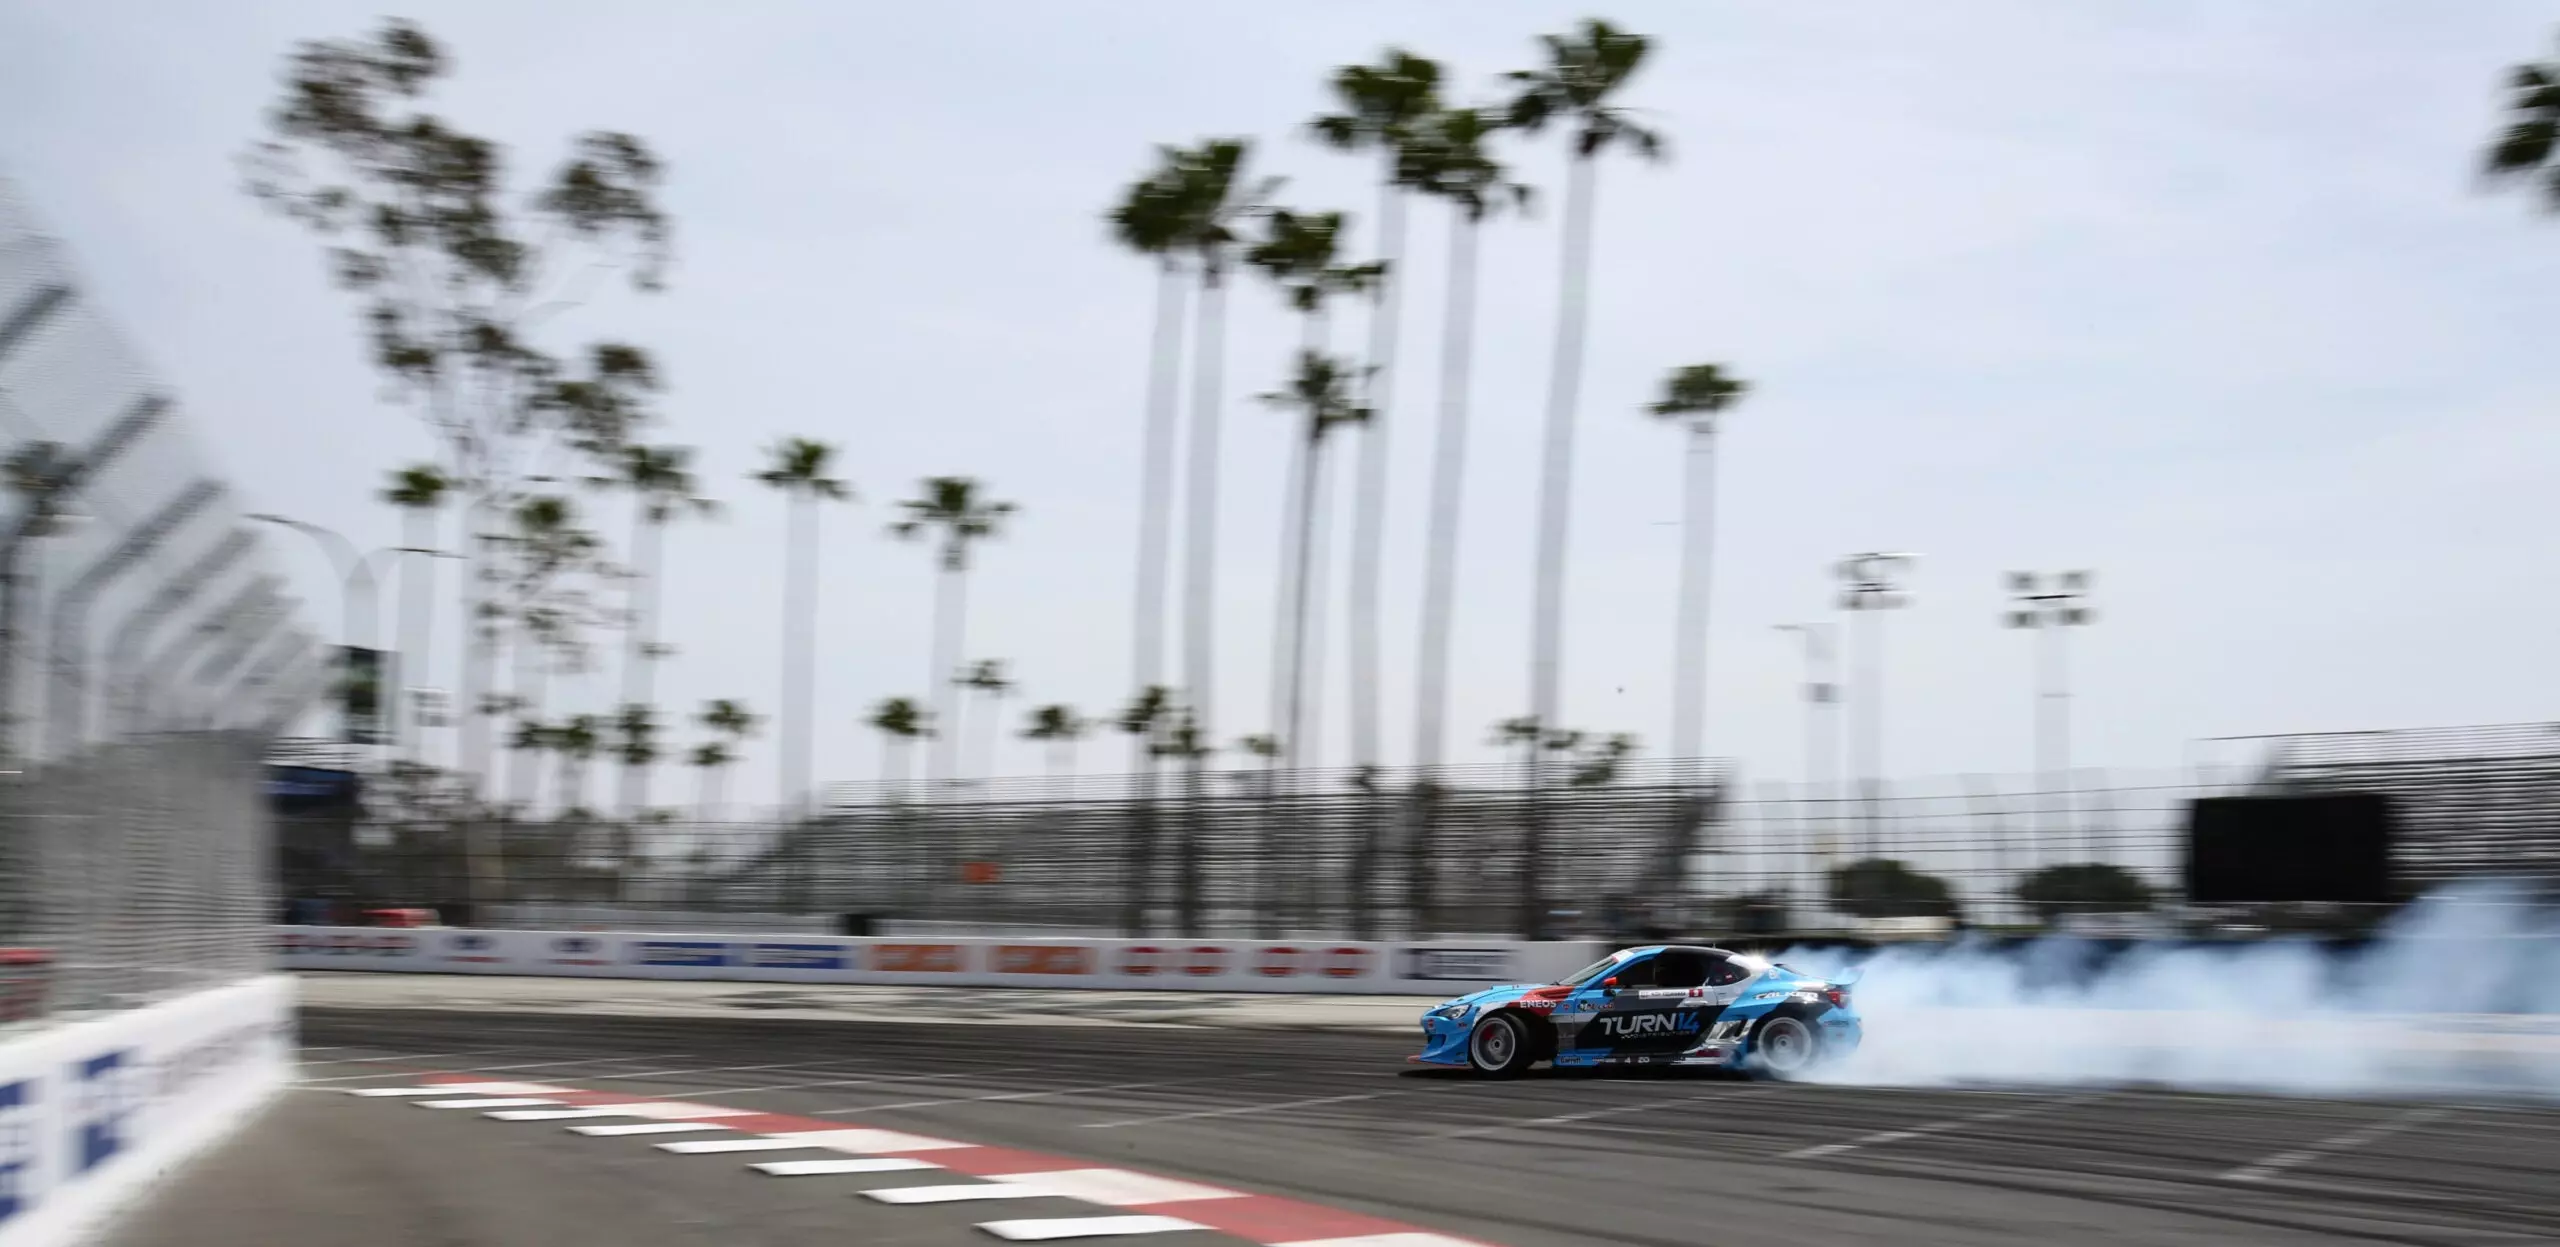 Palm Trees, Sunshine, and Tire Smoke From a 8.1-Liter Turbo LS-Powered BRZ